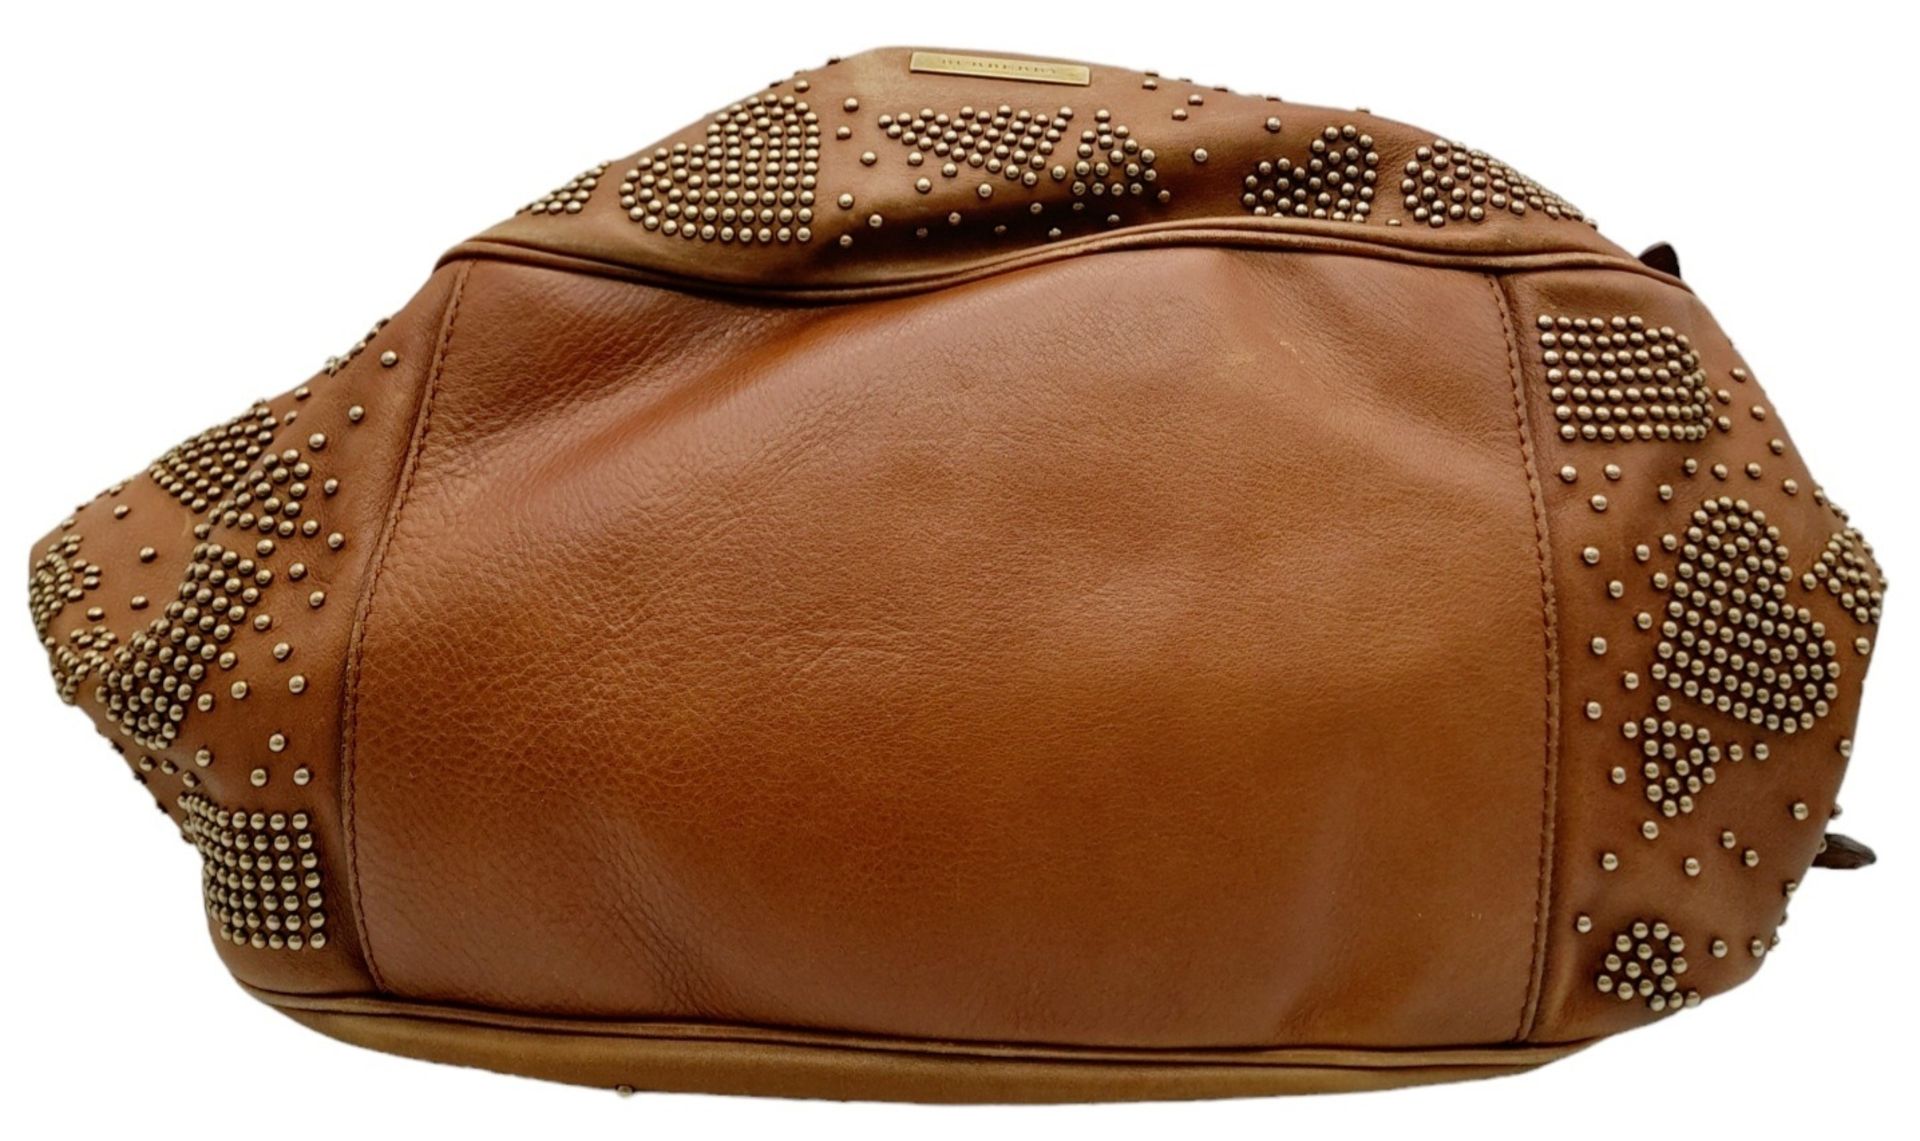 A Burberry Tan Studded Heart Hobo Bag. Leather exterior with stud embellishments, golden-toned - Bild 3 aus 8